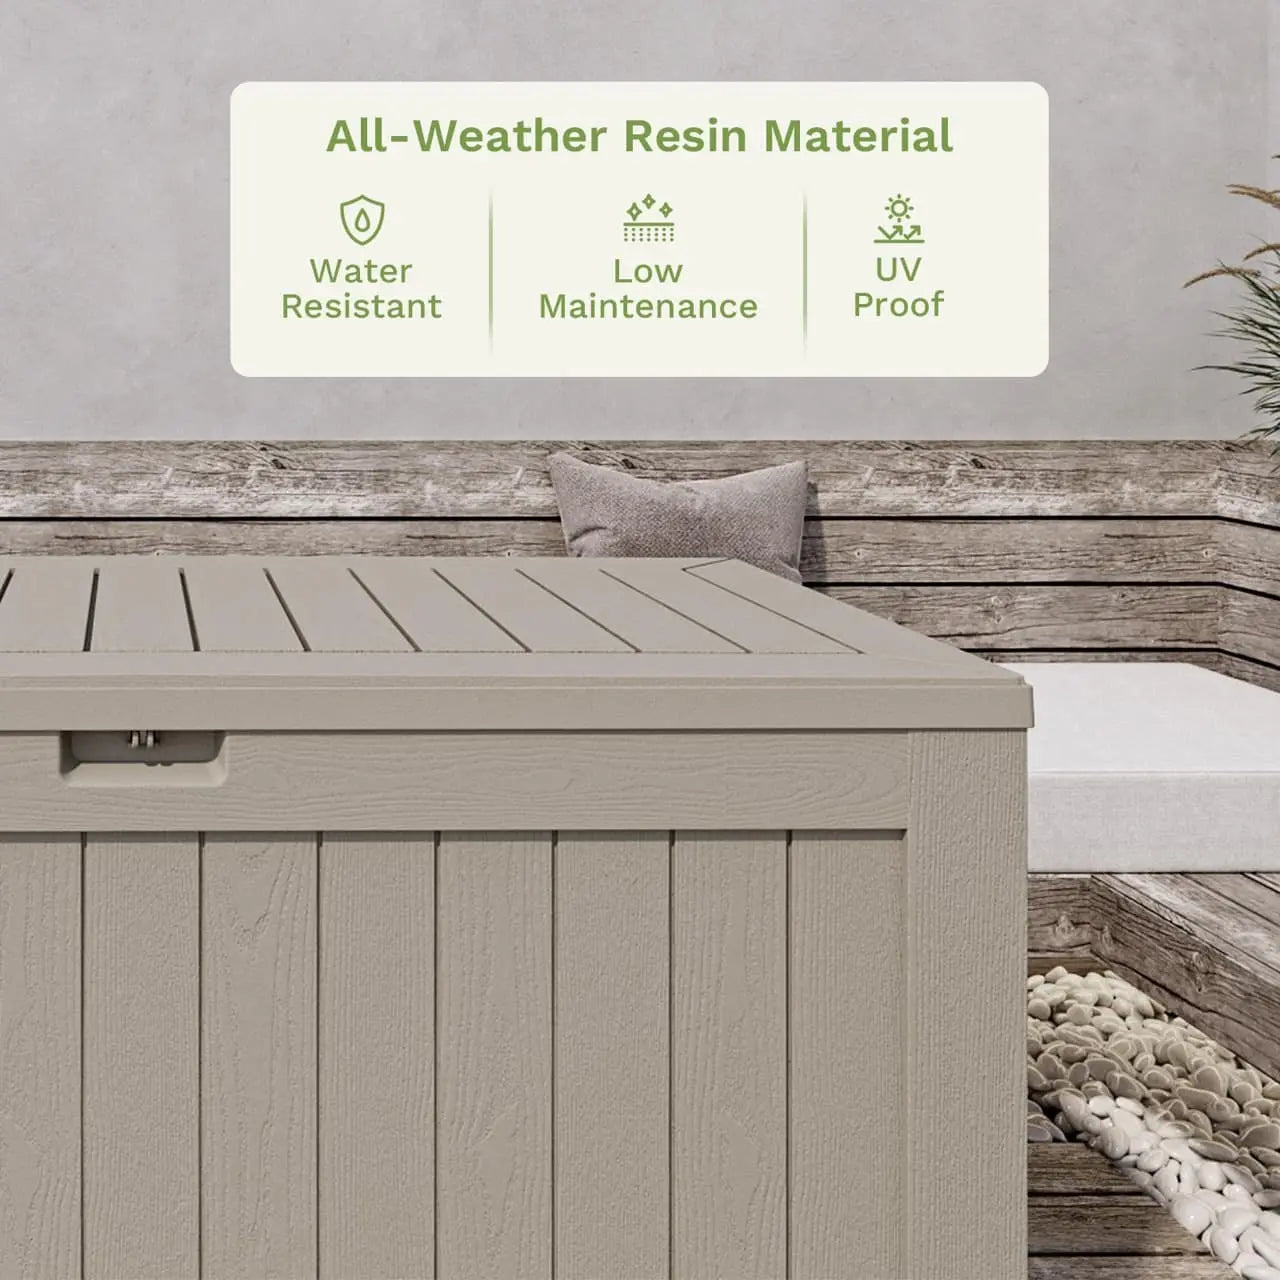 120 gallon outdoor storage deck box all-weather resin materials